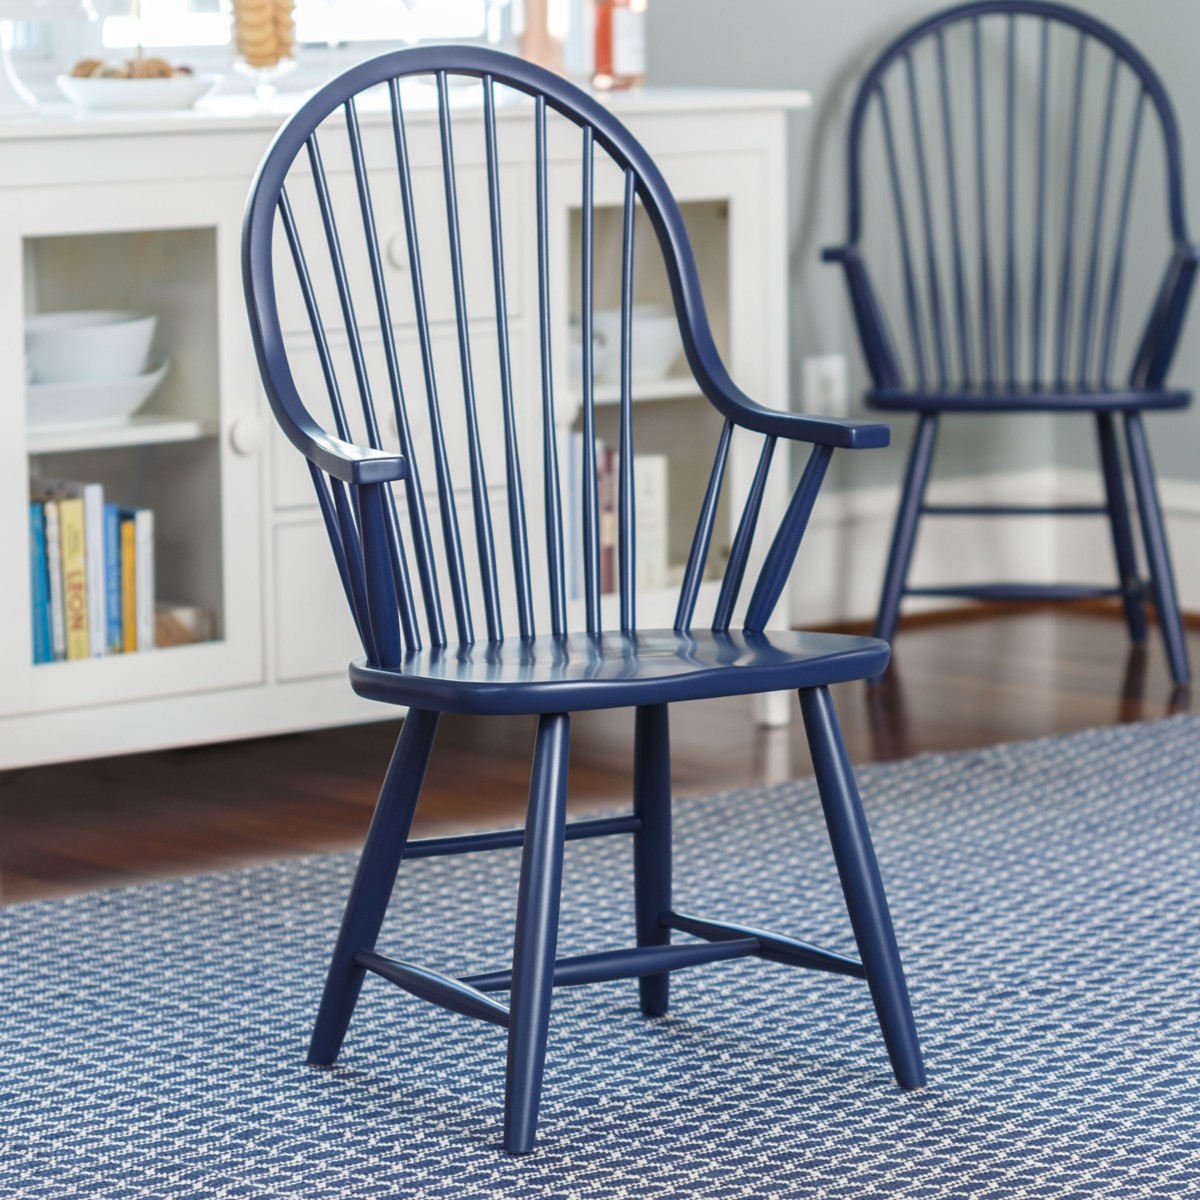 Maine Cottage Windsor Arm Chair | Handmade to Order Colorful Windsor Chair 